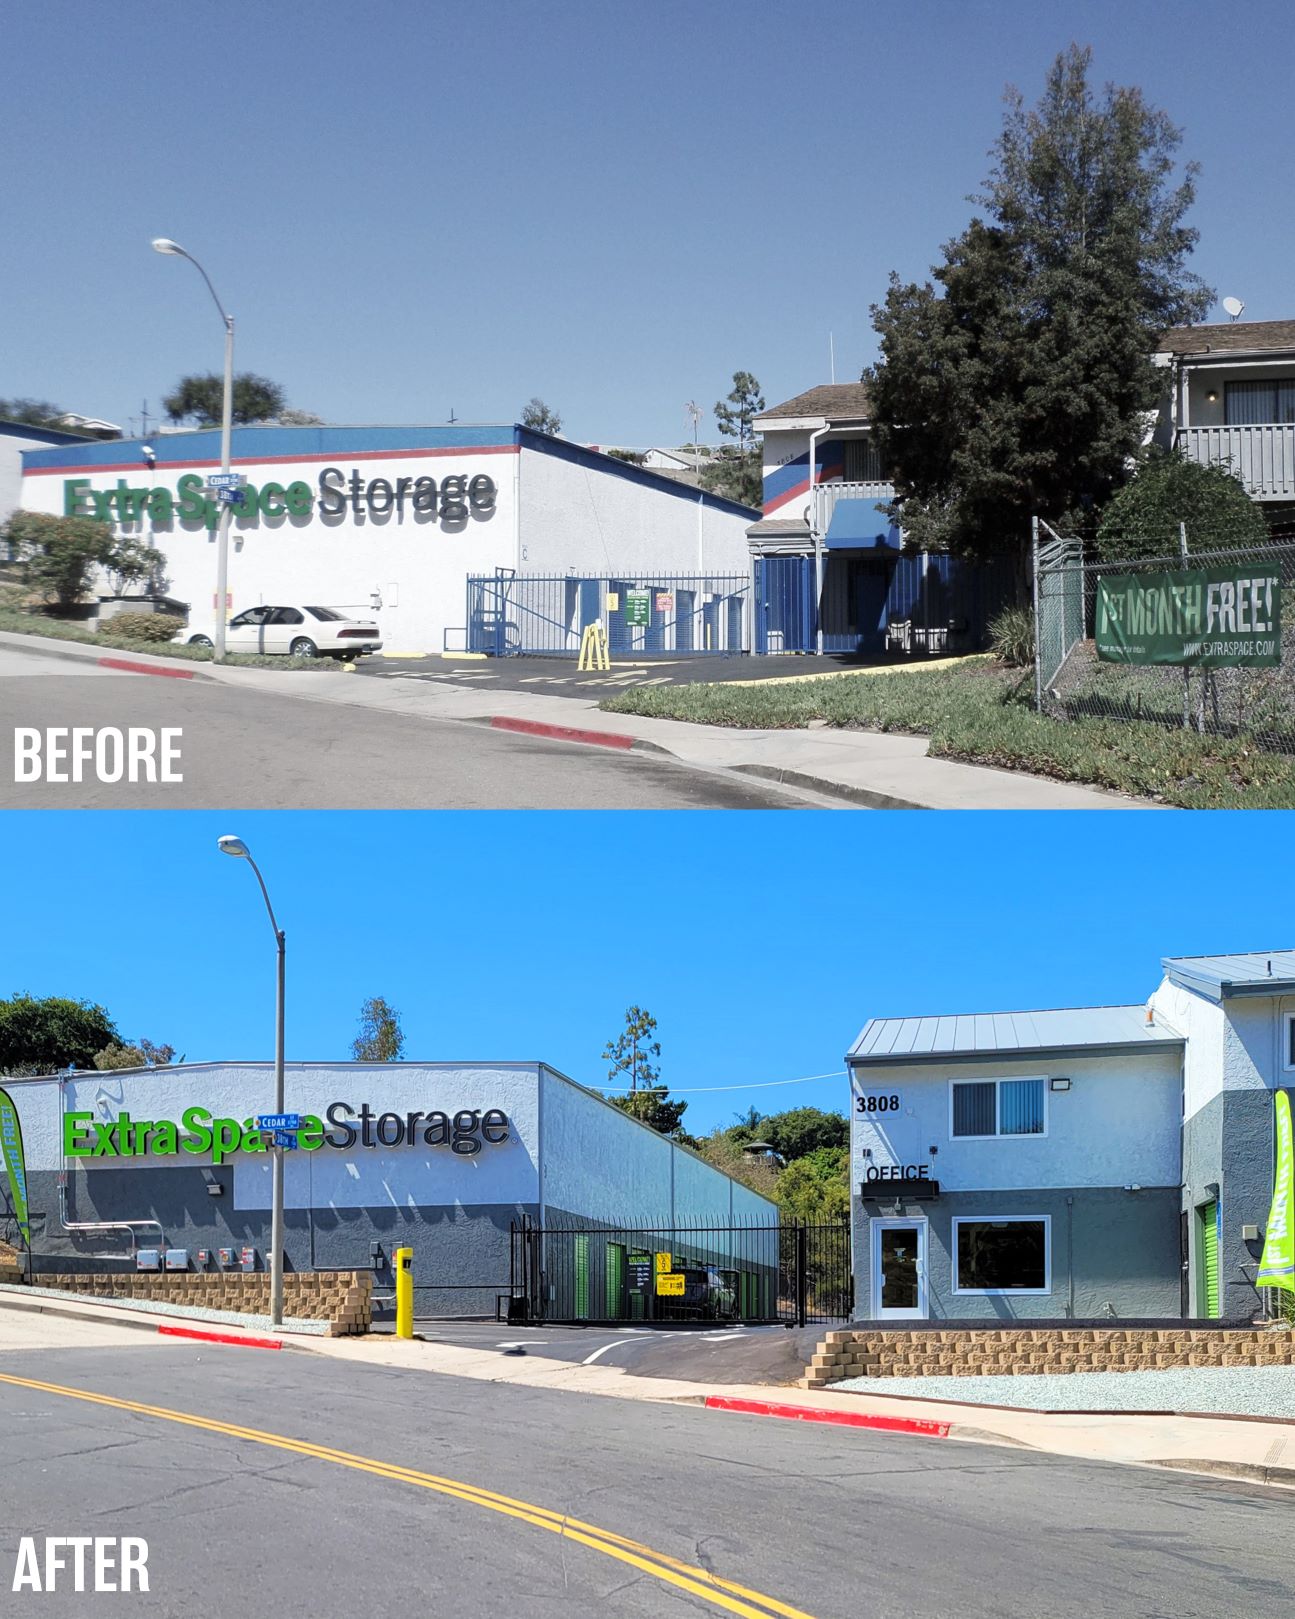 Before & After Photos of Updated Exterior of Expanded Extra Space Storage Facility in San Diego